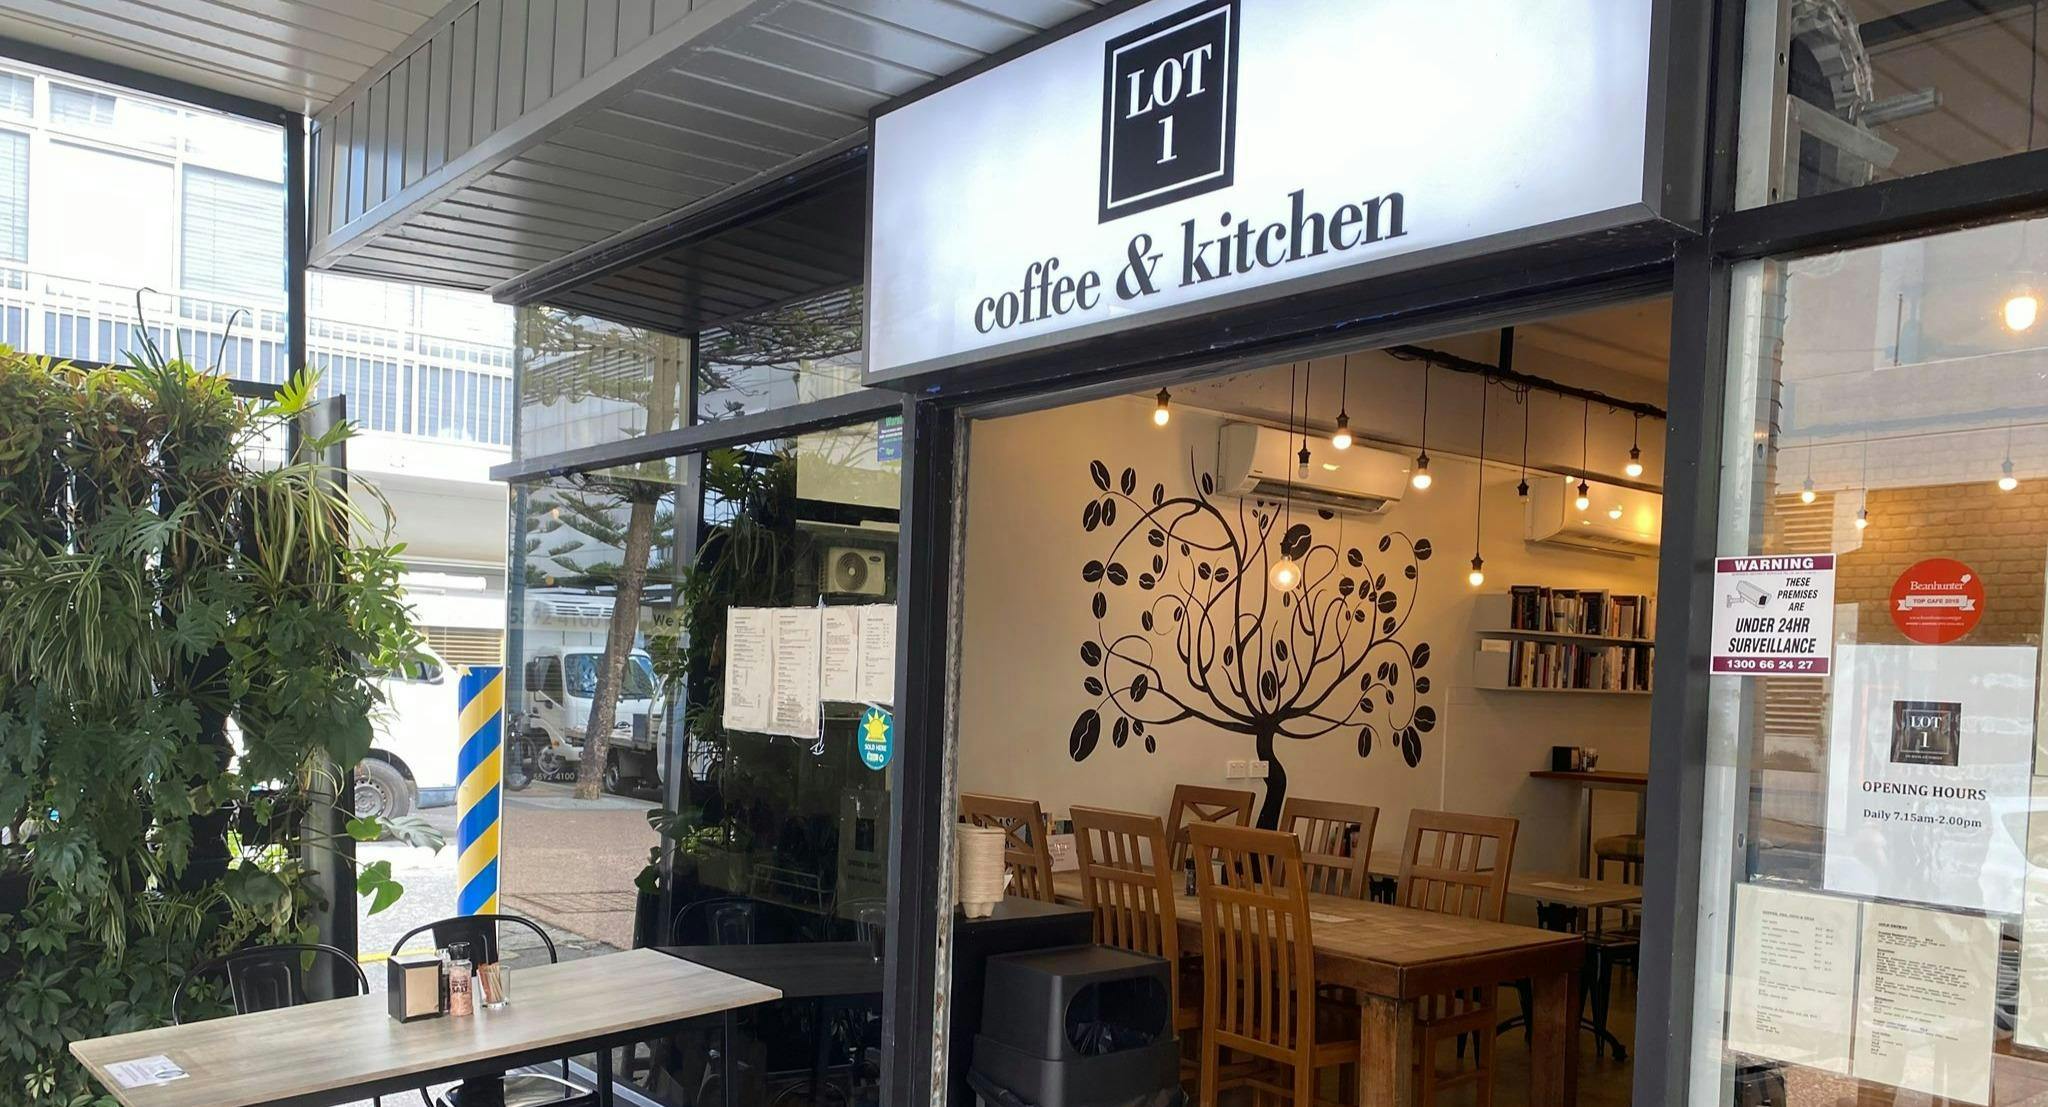 Photo of restaurant Lot 1 Coffee in Surfers Paradise, Gold Coast